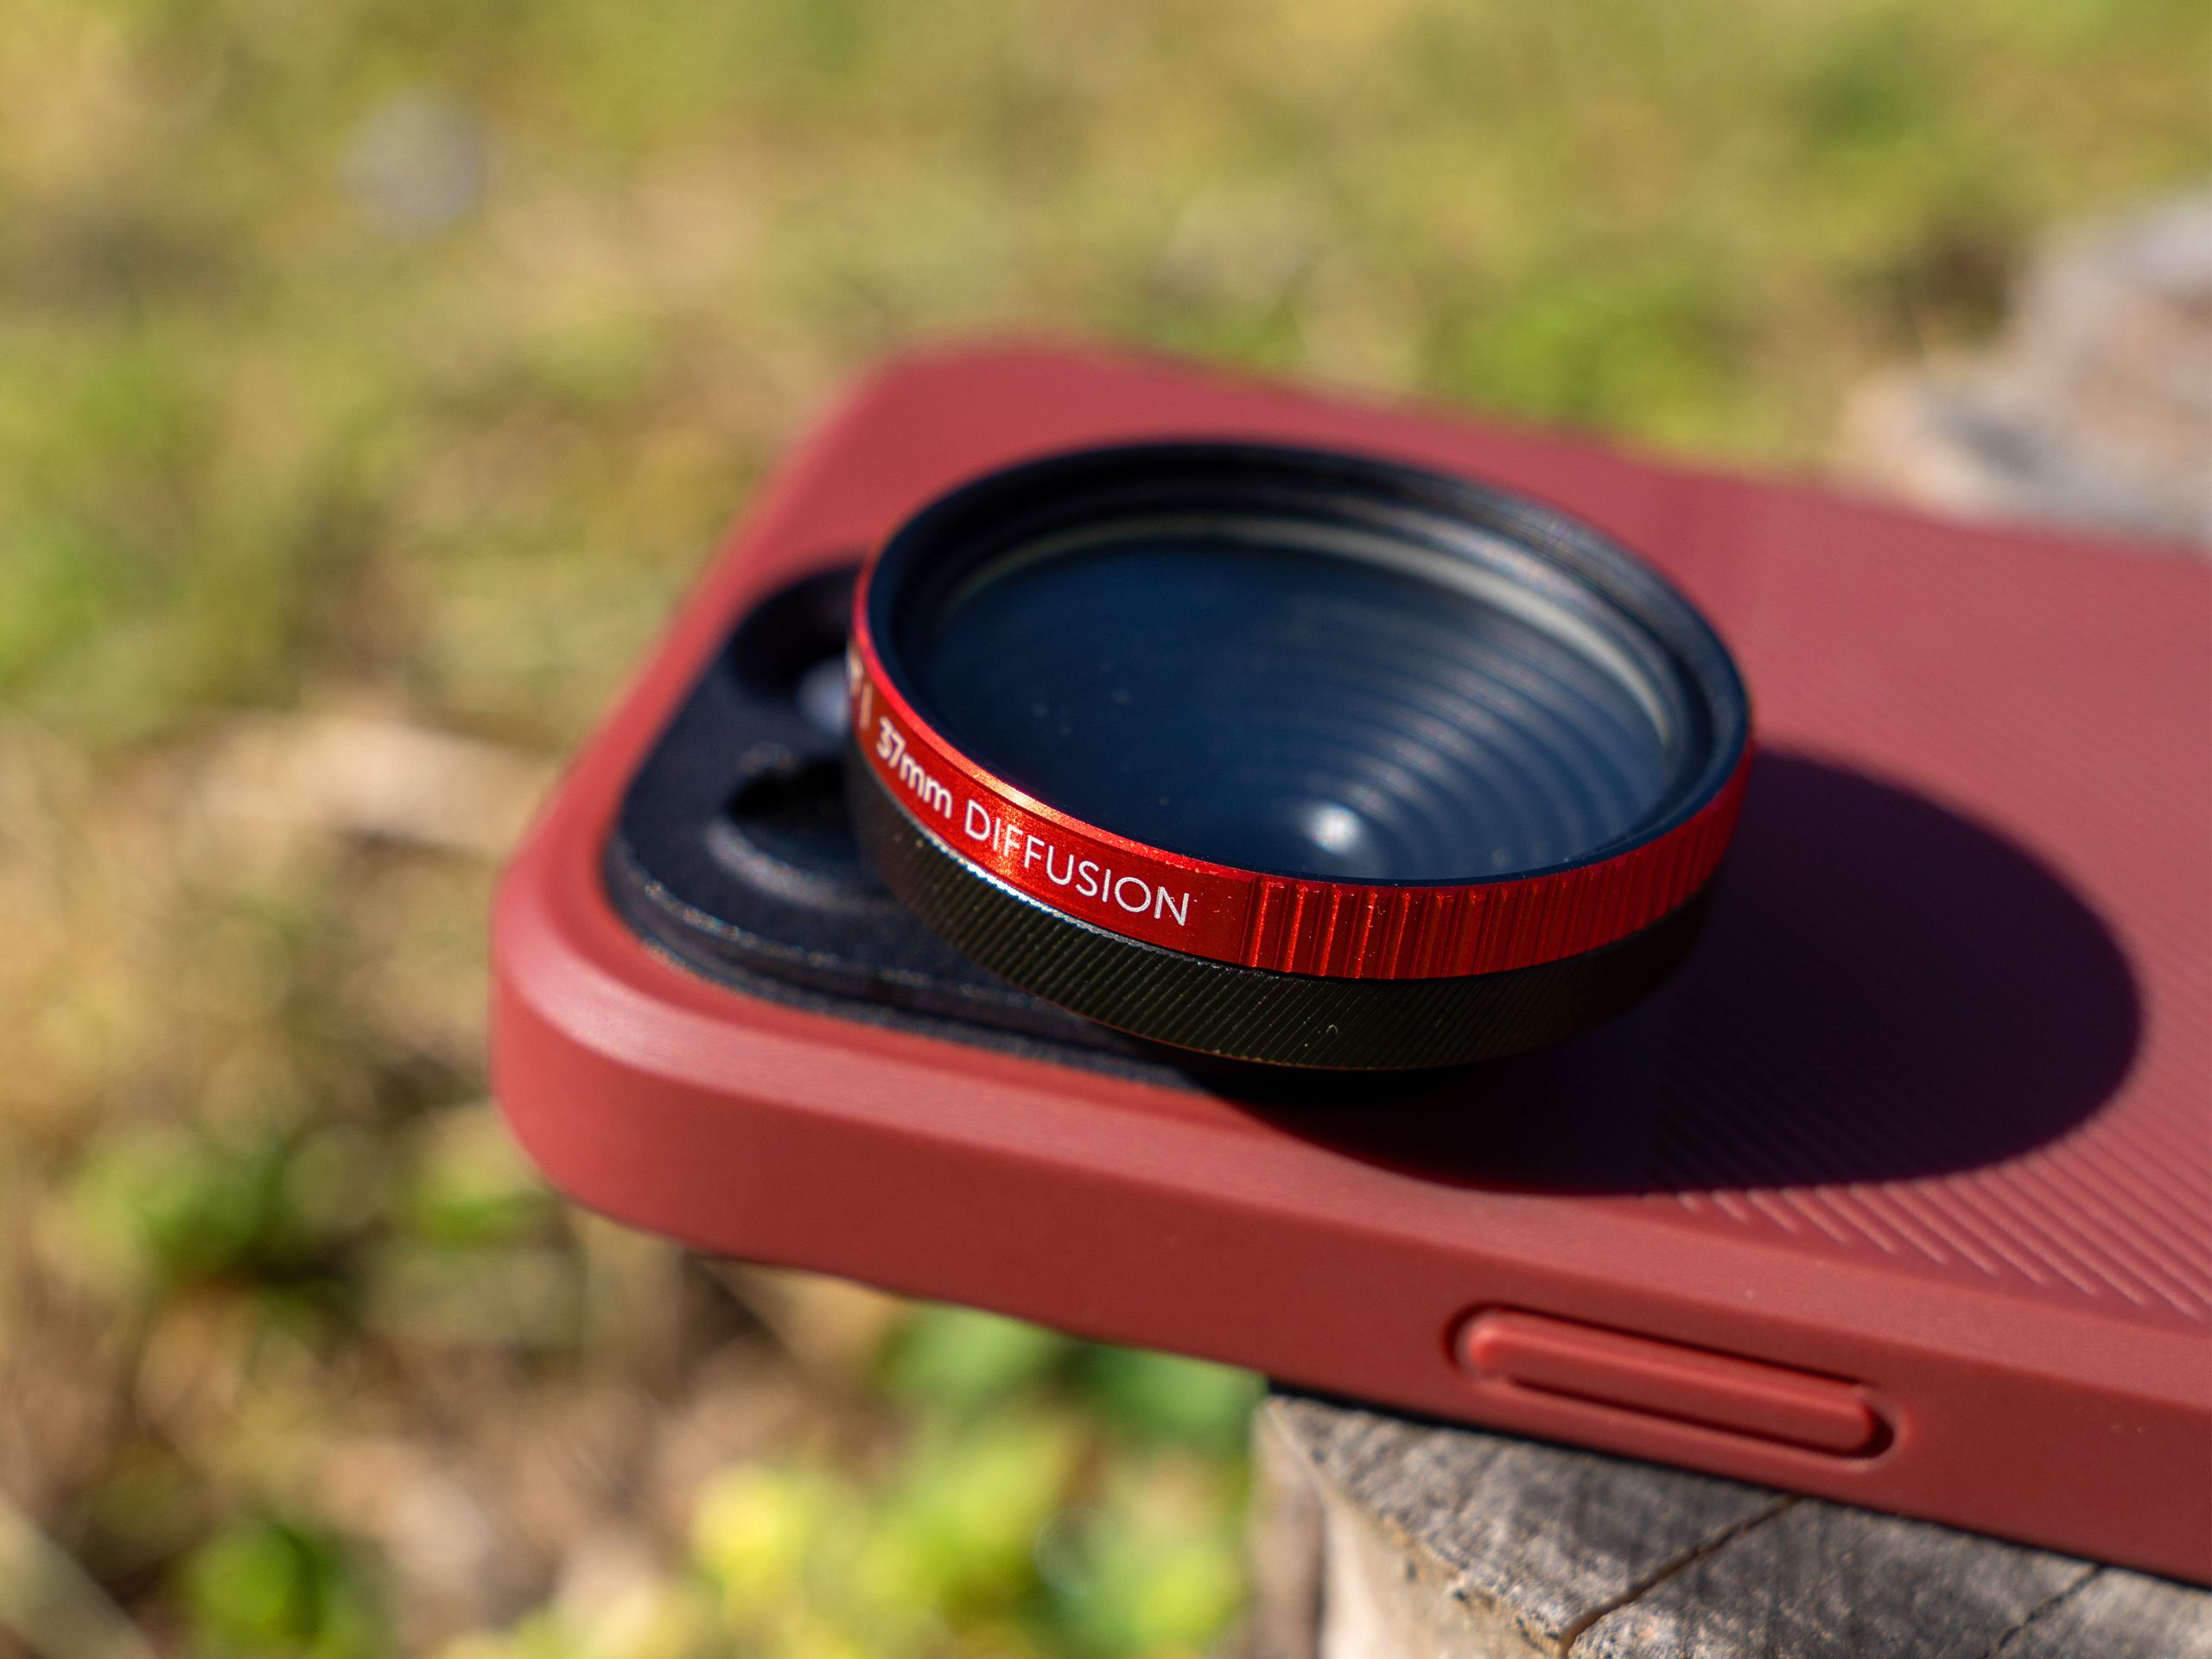 M-Series | 37mm Phone Filter Mount | Moment